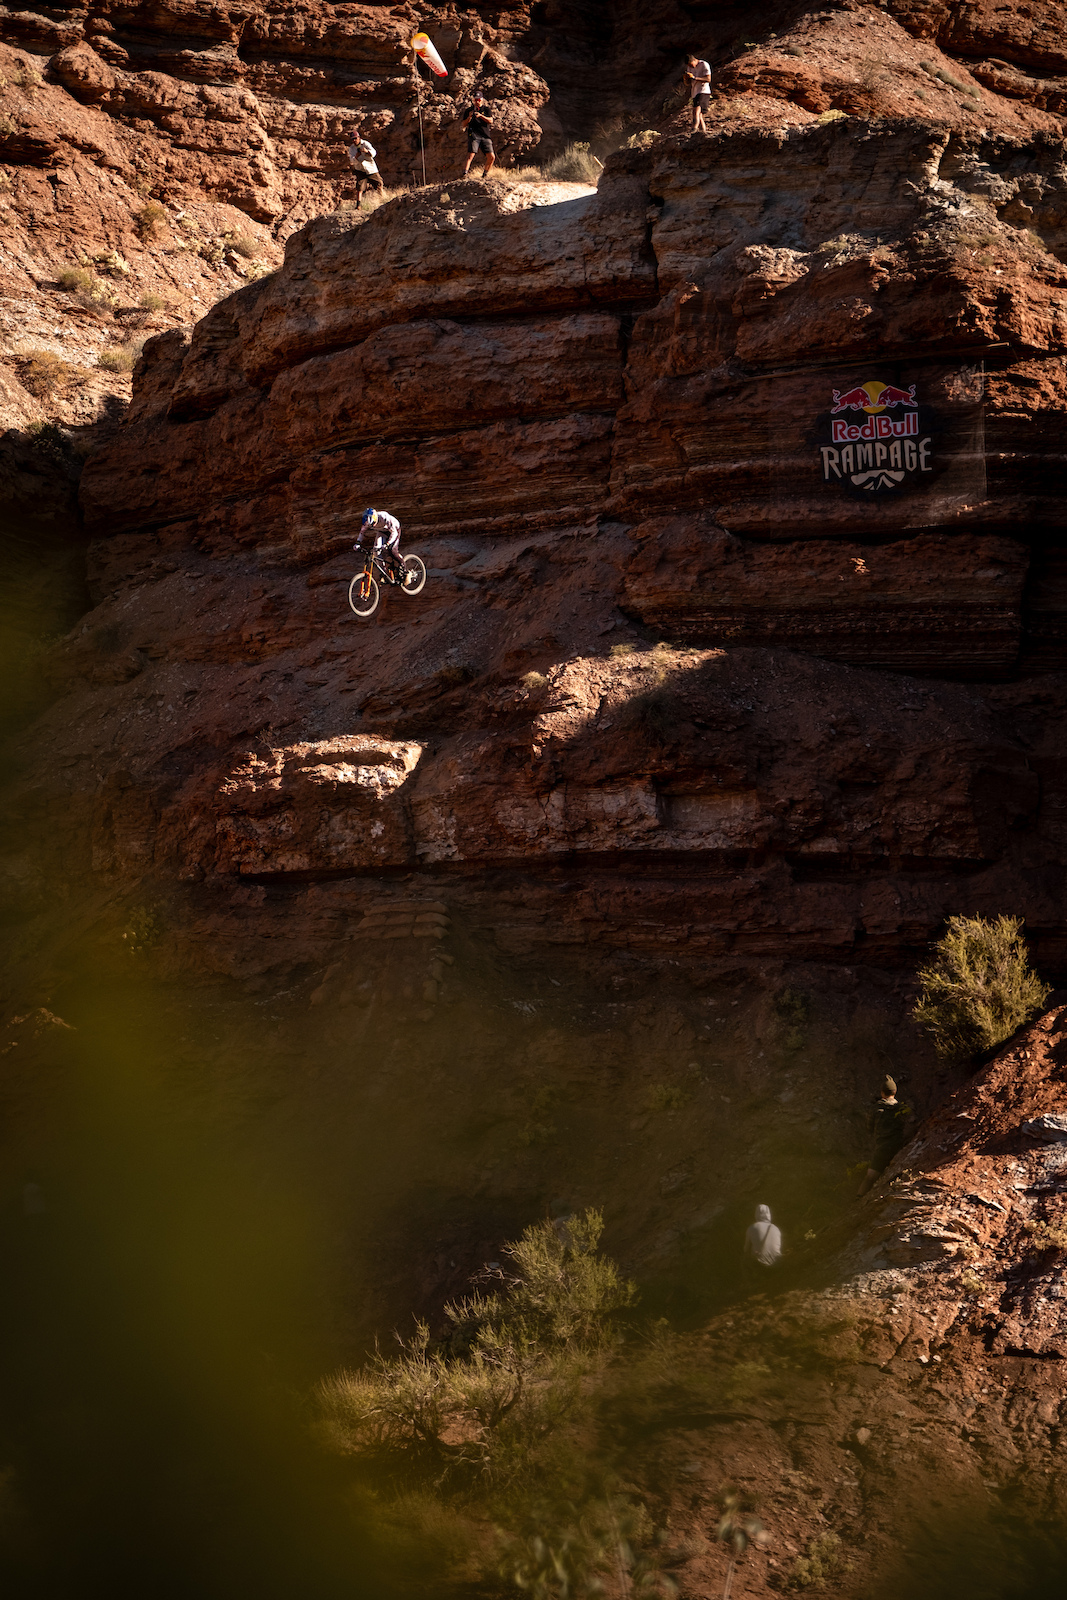 Gee Atherton's massive drop attempt at Rampage 2023. Photo: Izzy Lidsky.